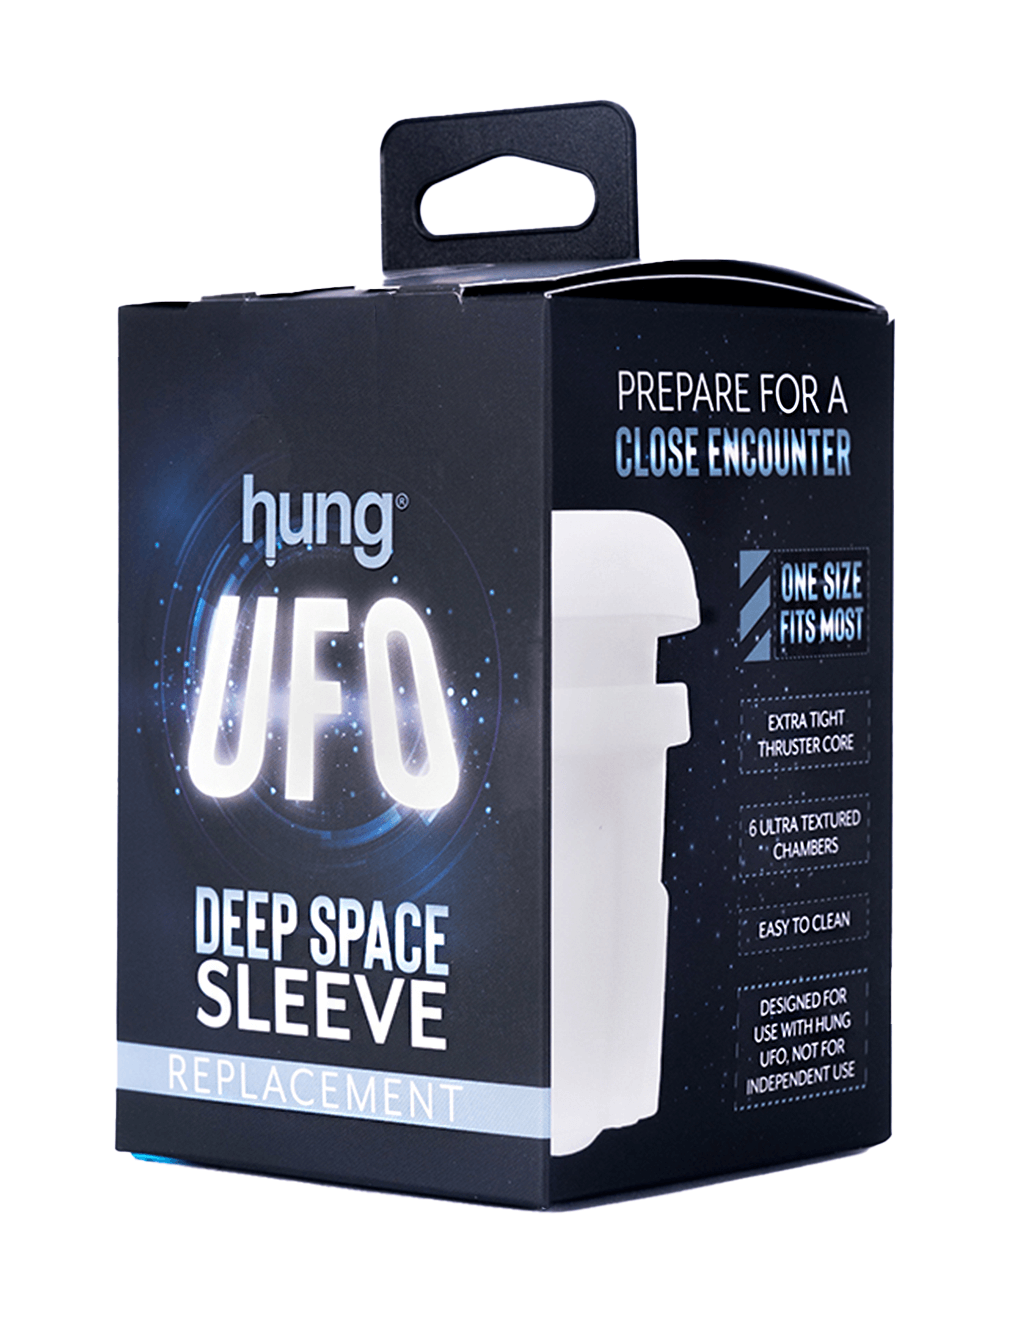 Hung UFO Replacement Sleeve - Box Main